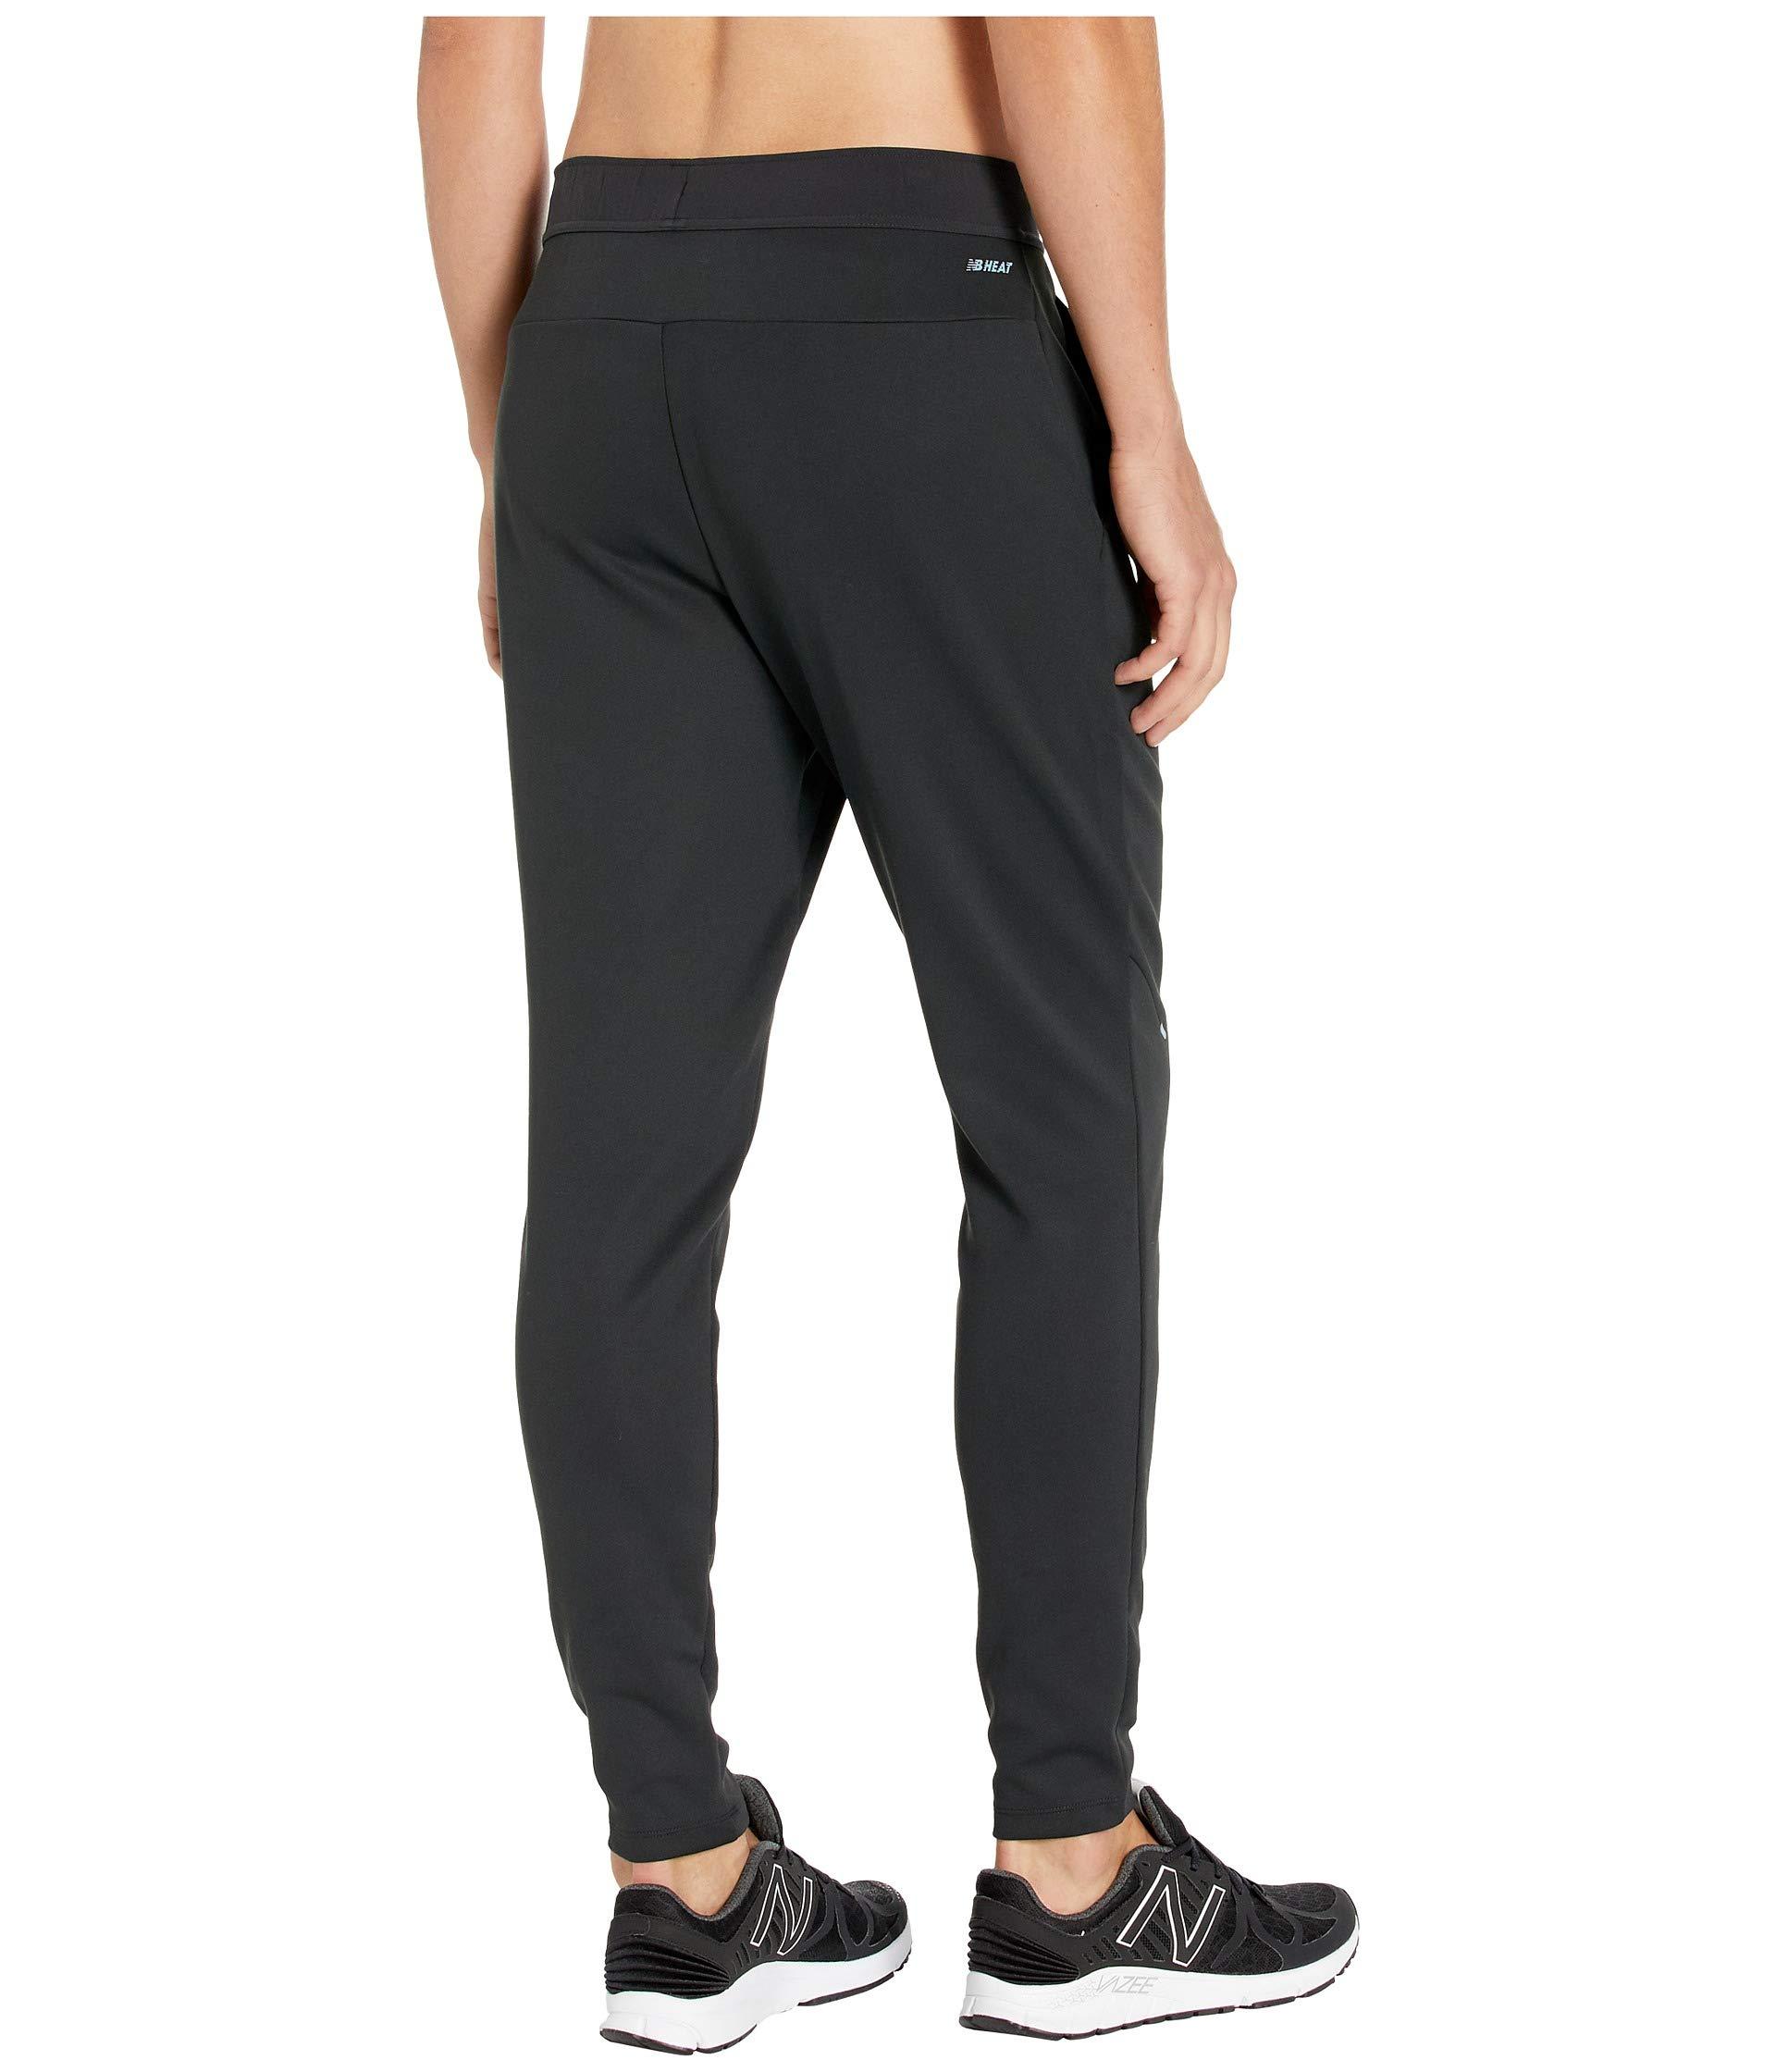 New Balance Synthetic Q Speed Crew Run Pants in Black for Men - Lyst